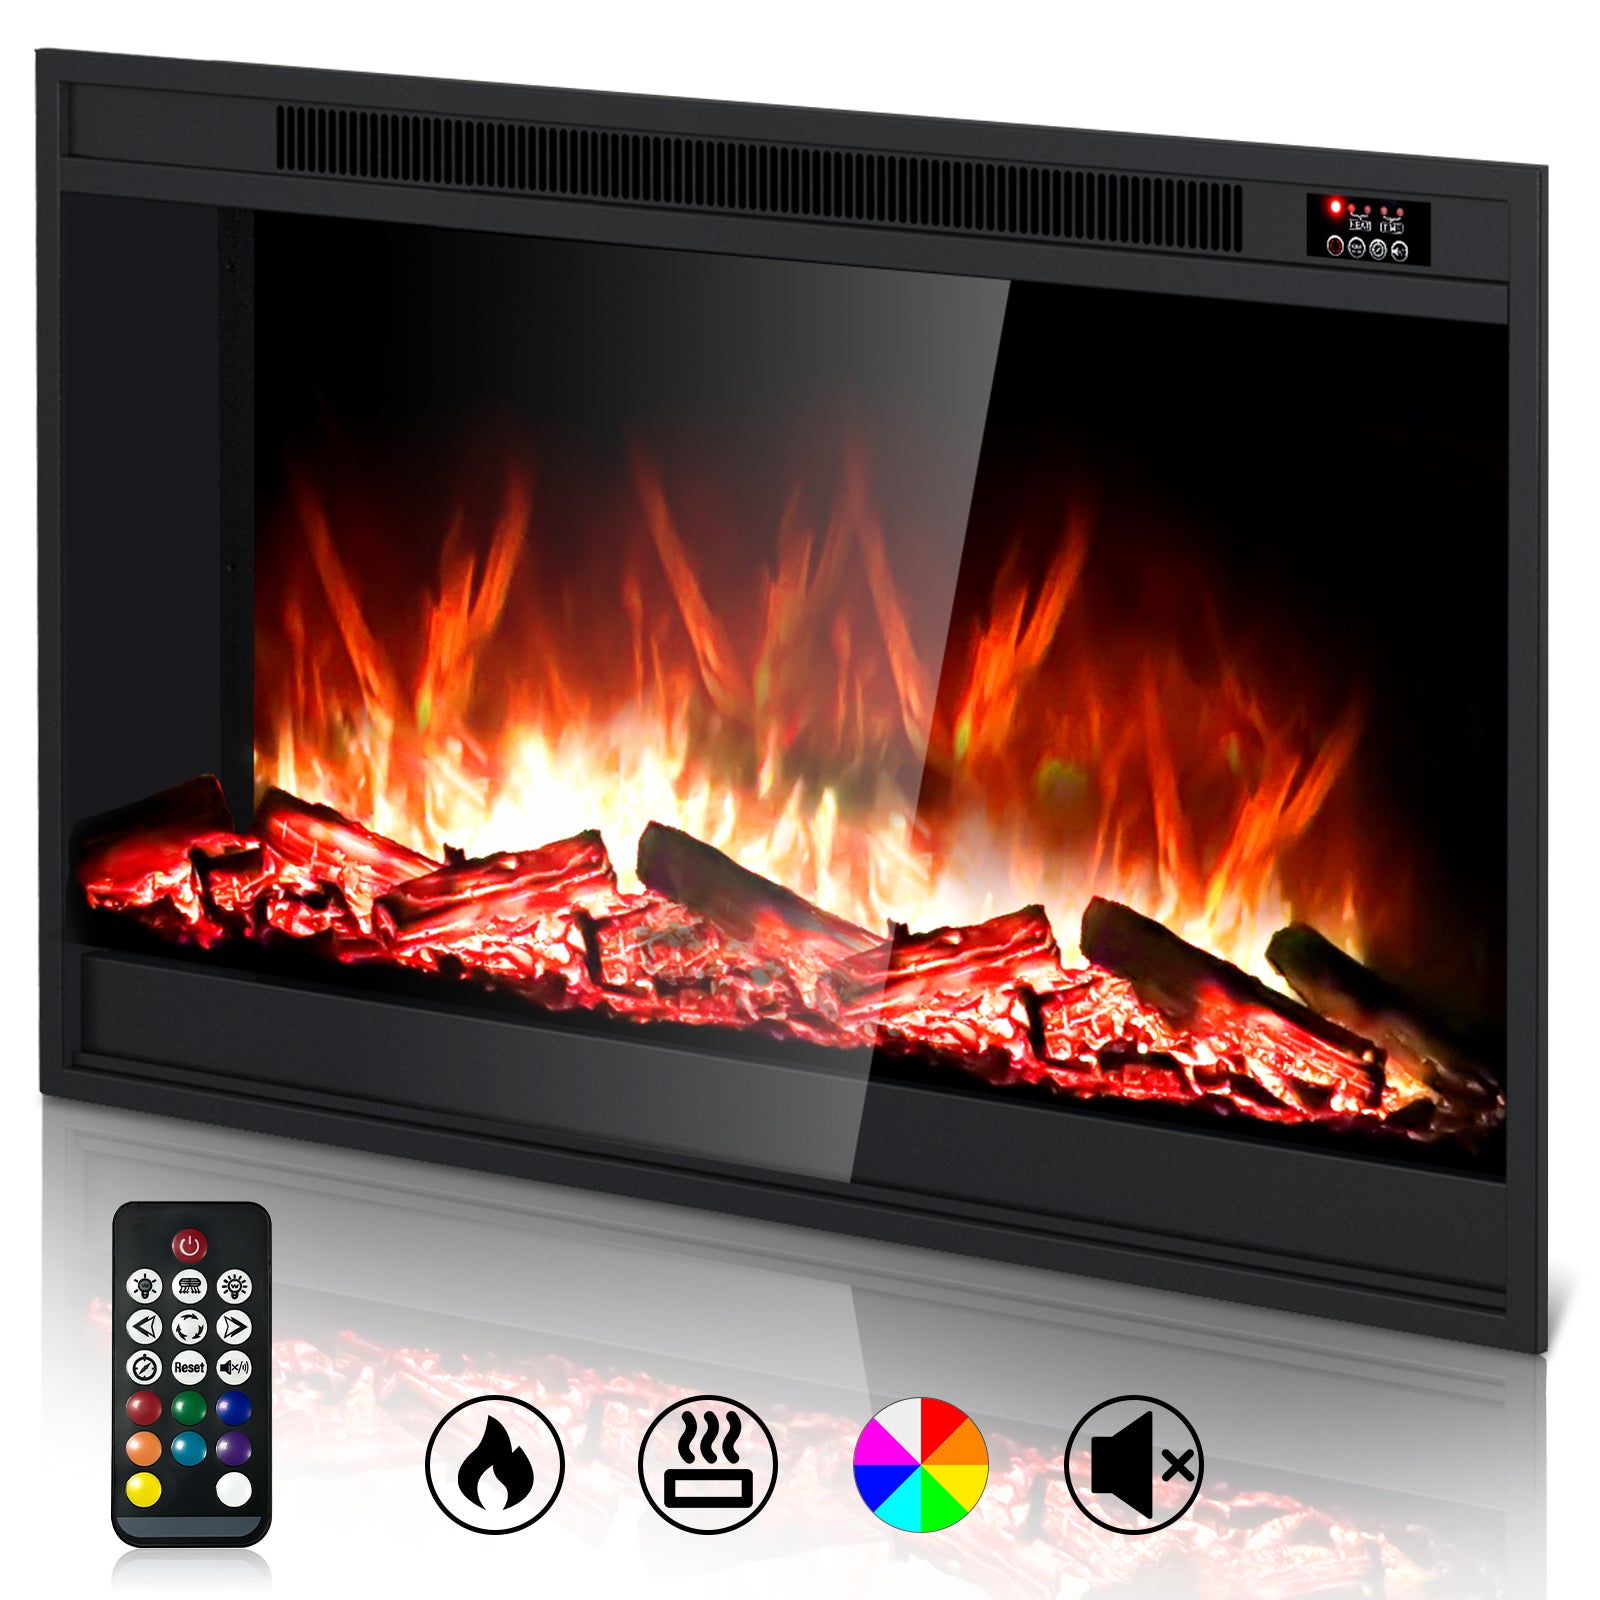 Electric Fireplace Inserts 24 inch Fire Place Eletric Fireplace Heater, Realistic LED Flame with Infrared Remote Control and Logs for Existing Living Space Room, Black